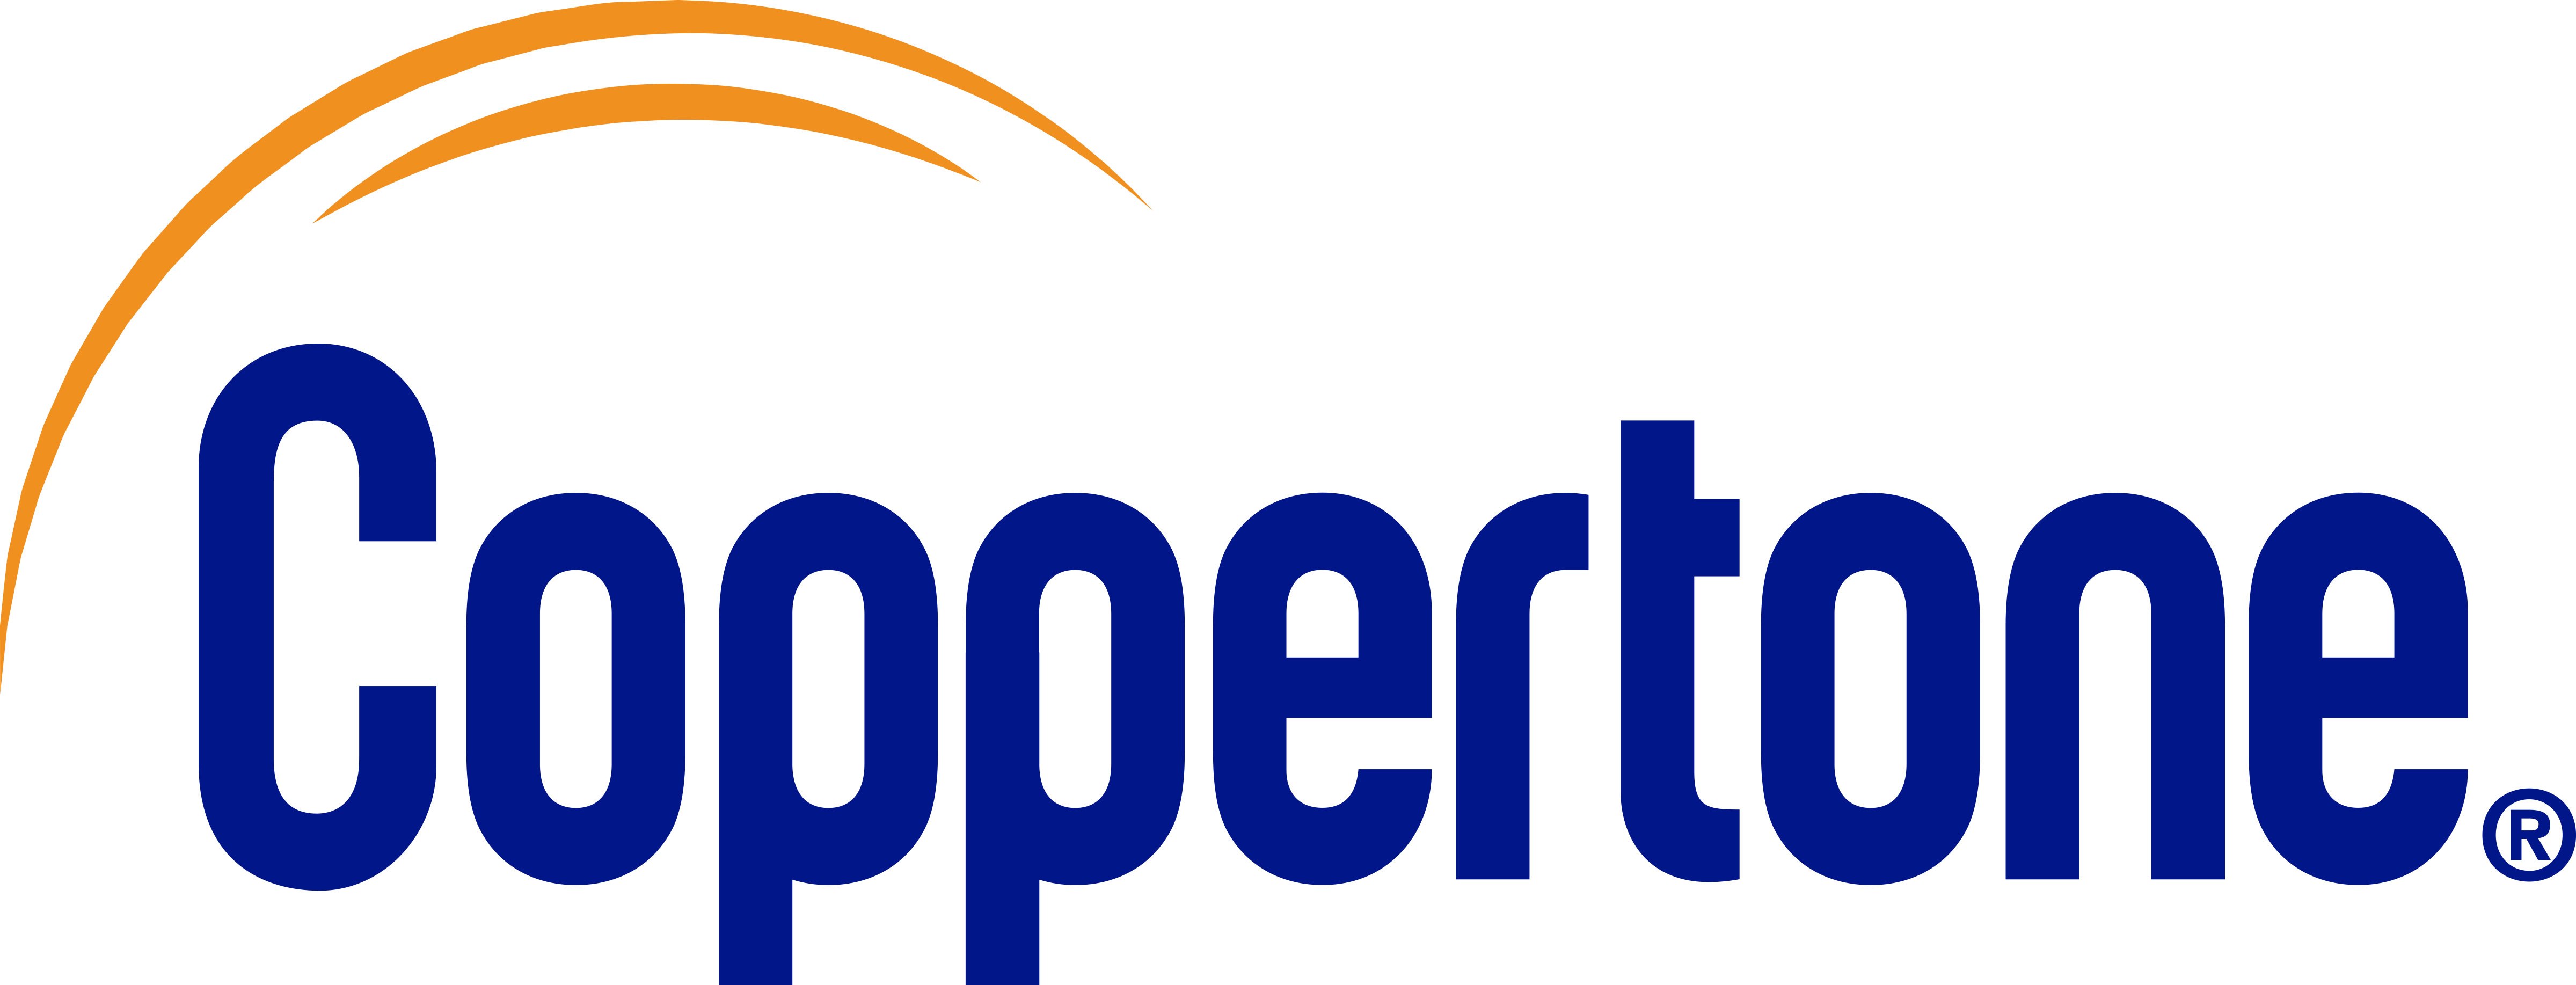 Beiersdorf successfully completes acquisition of Coppertone.